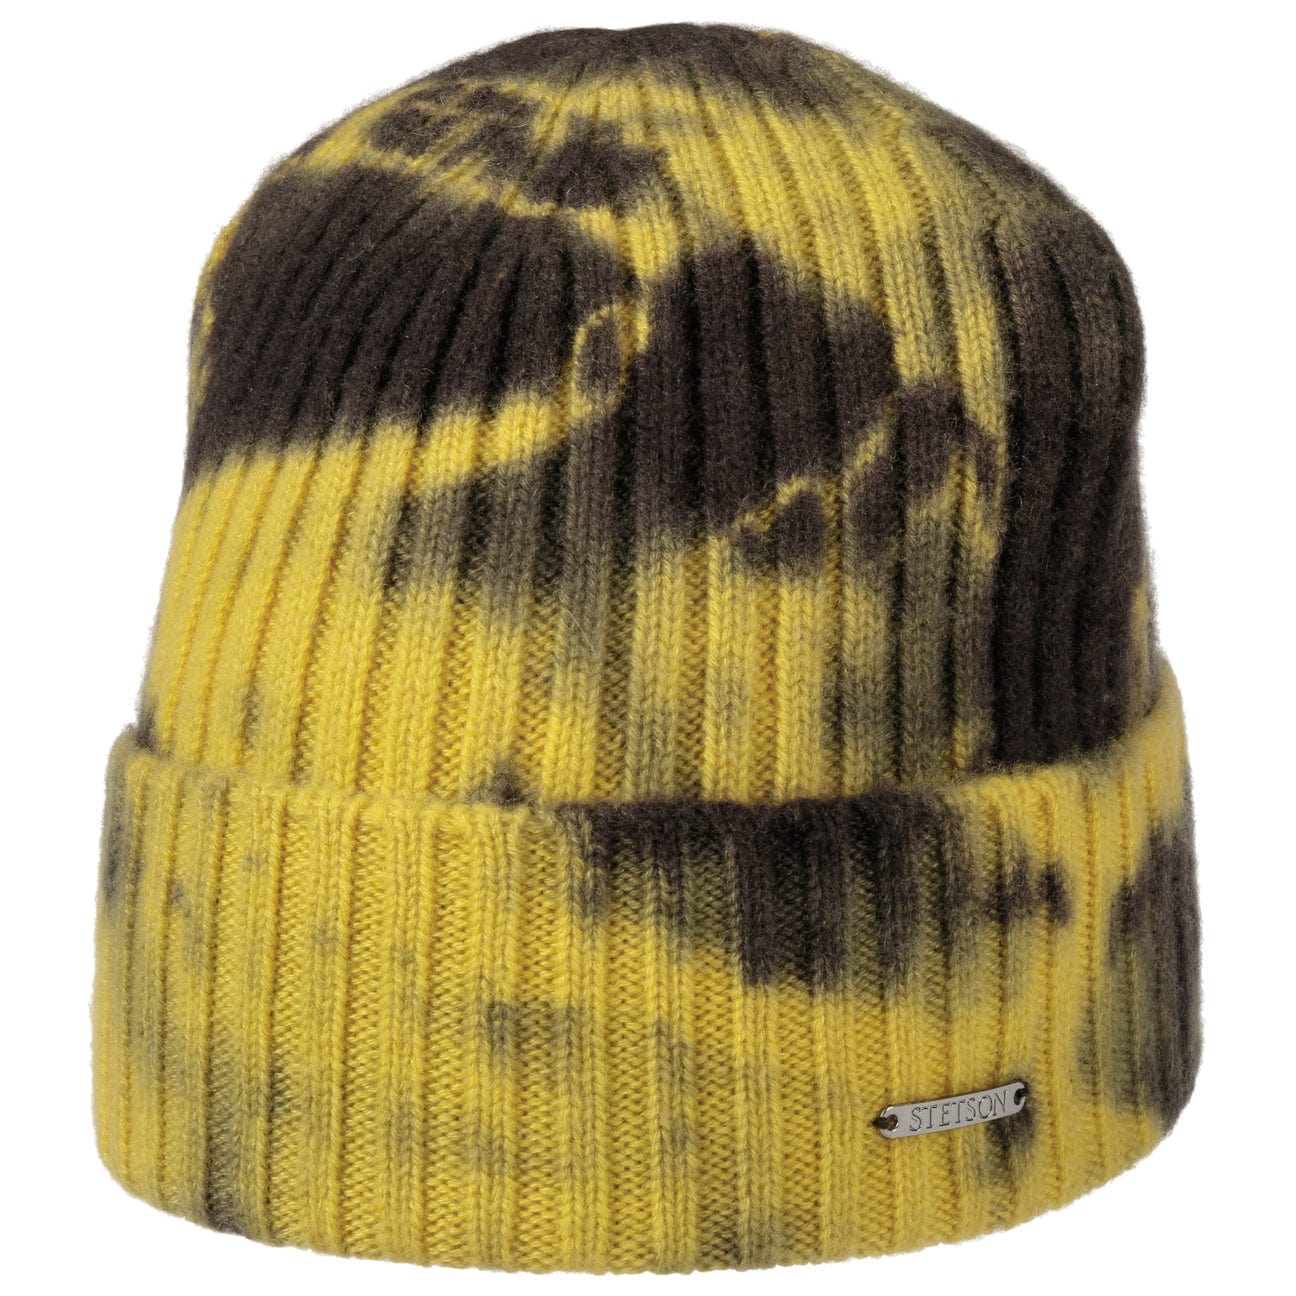 Rouven Cashmere Knit Hat by Stetson